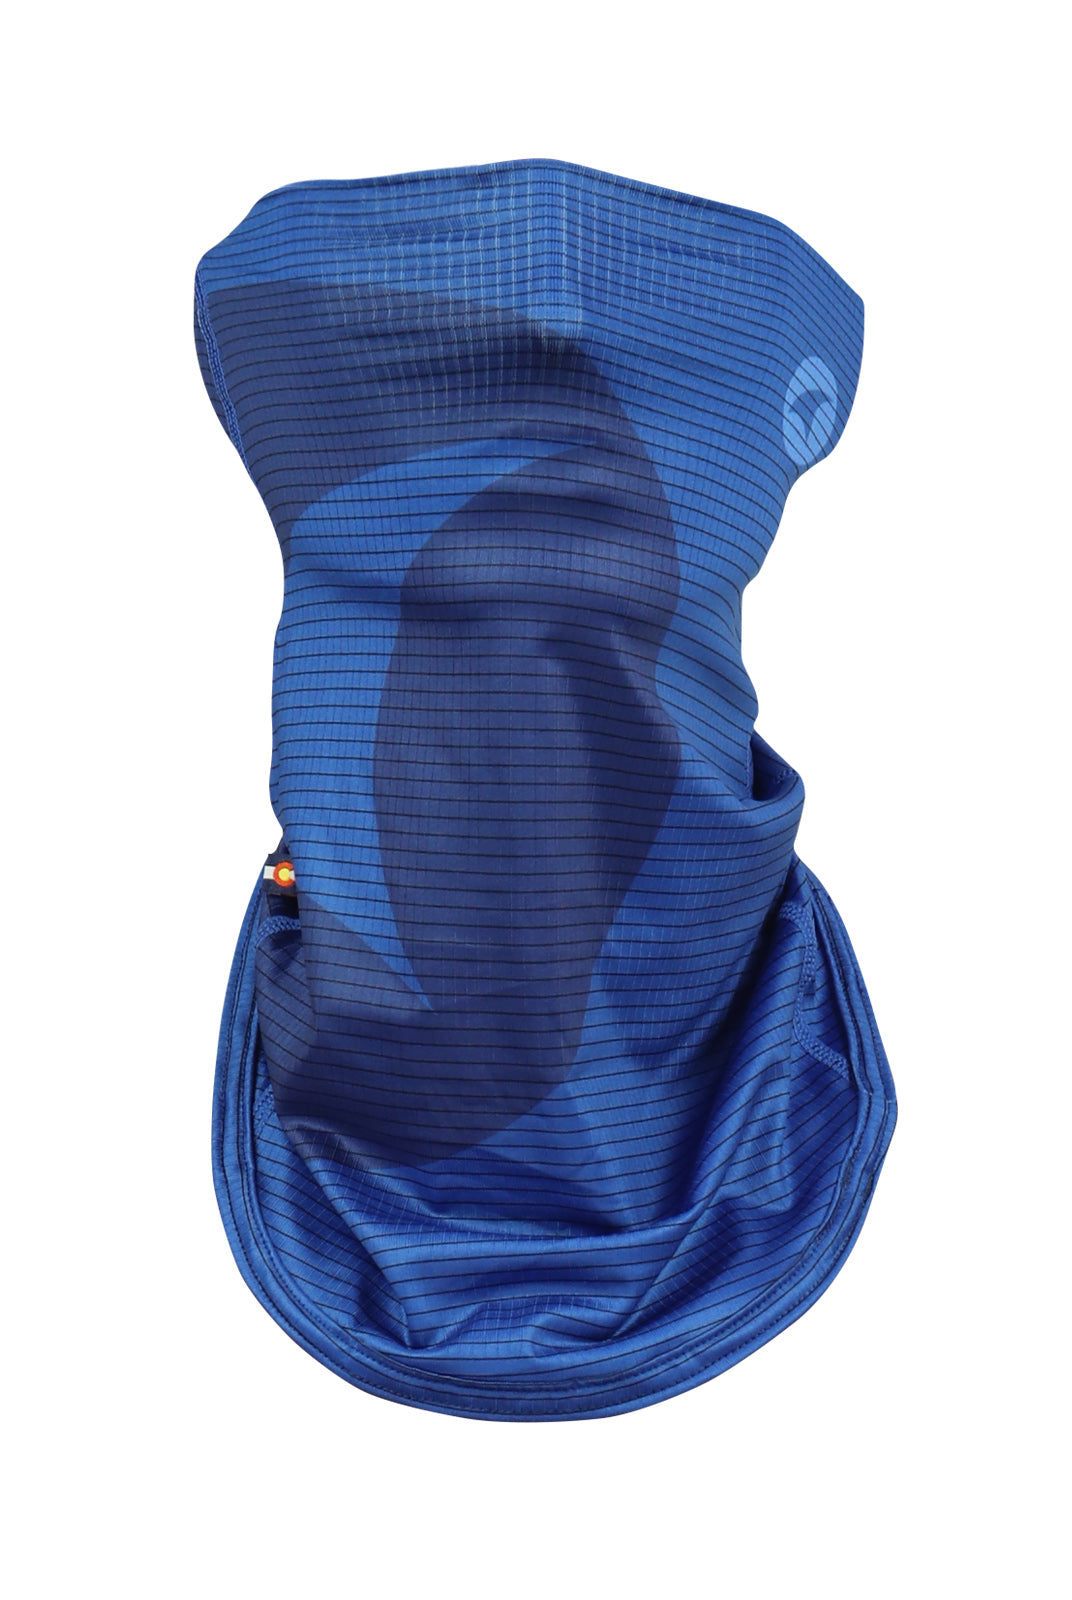 Blue Cycling Neck Gaiter - Front View